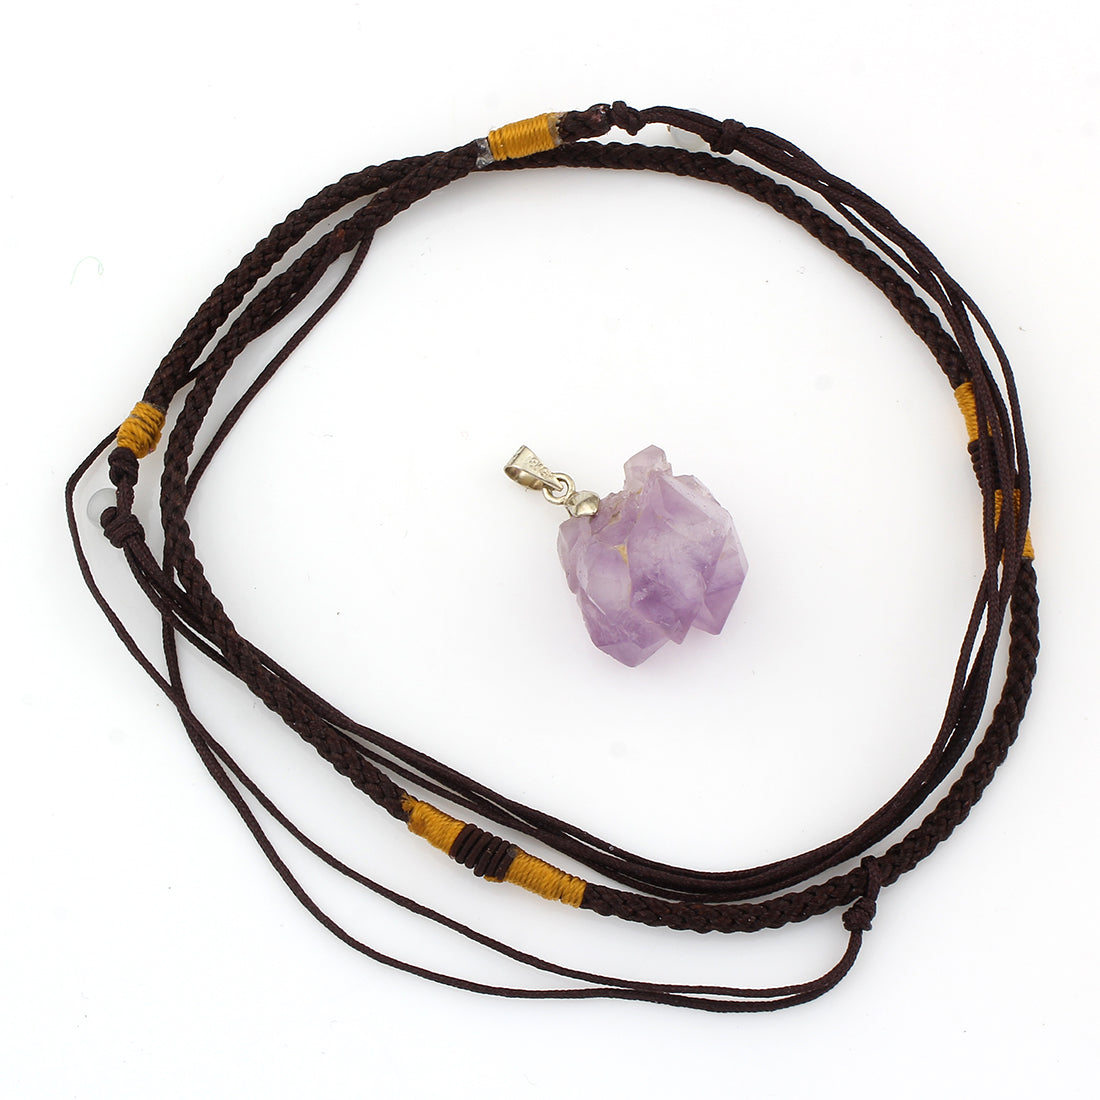 Amethyst Necklace - Leather Cord